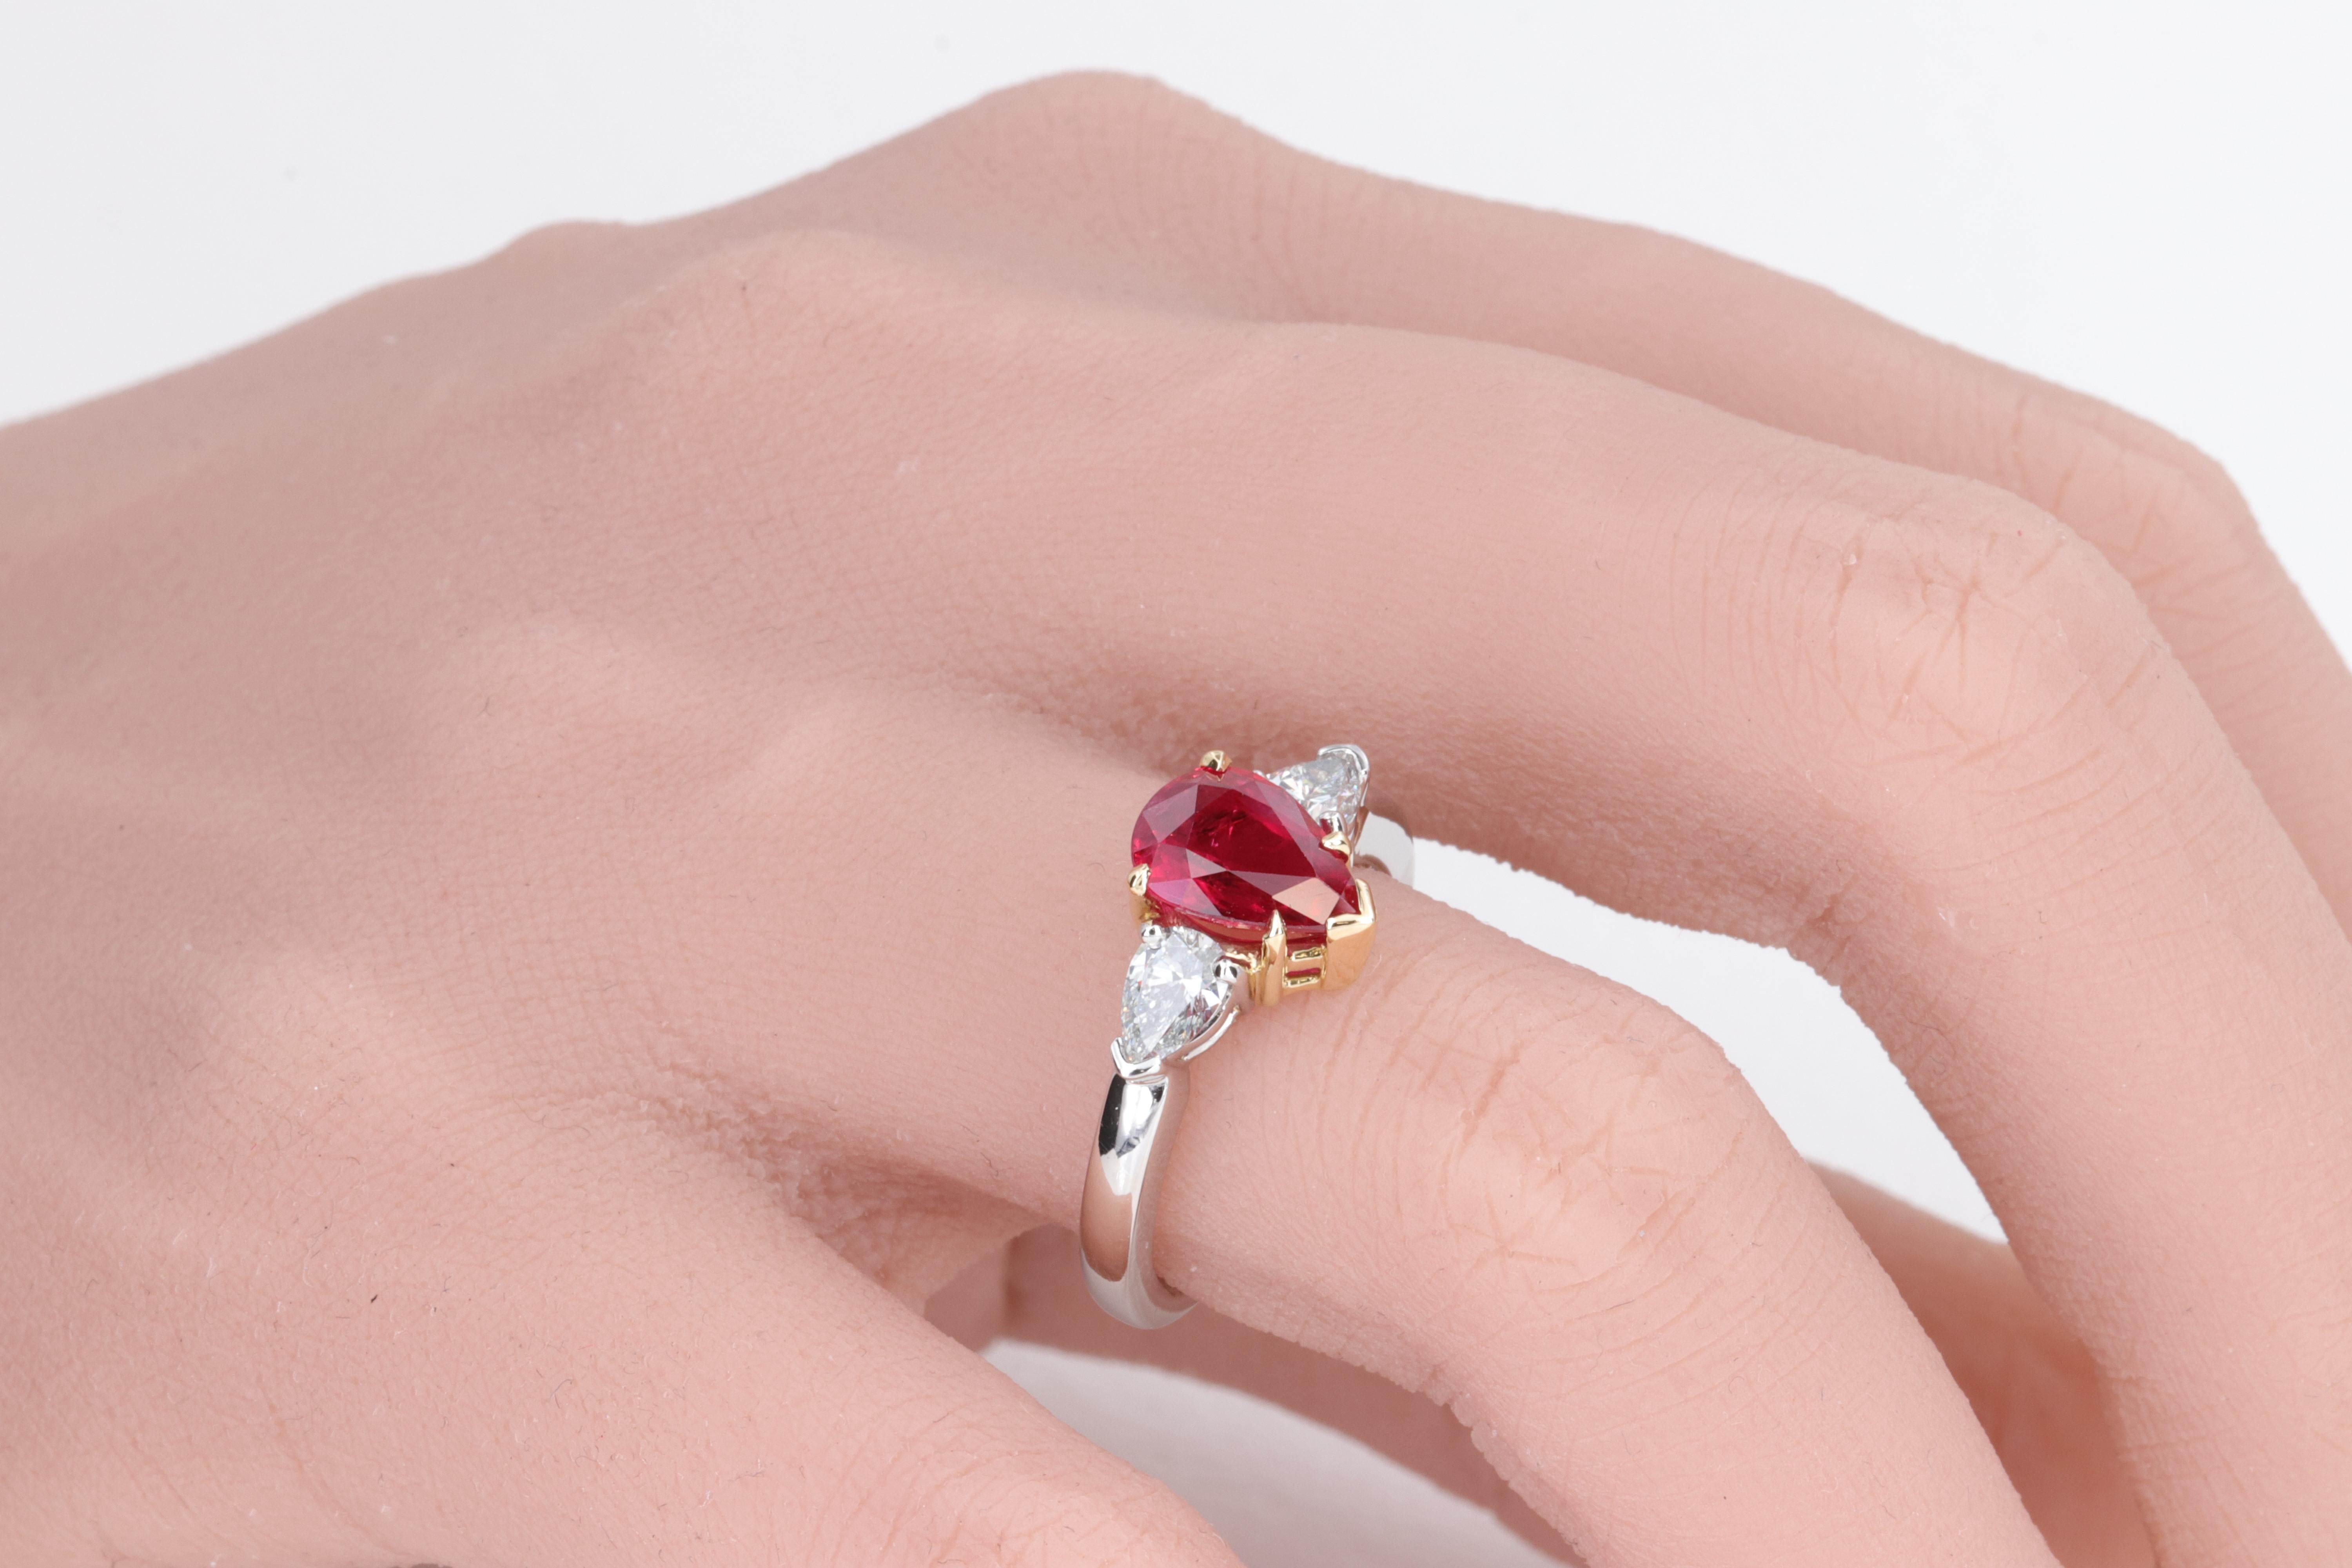 Ruby and Diamond Pear Shape GIA 3 Stone Ring in Platinum and Yellow Gold

A beautifully made classic three stone ring set with a 1.99 carat vivid red pear shape ruby center stone accompanied by a GIA report, and 2 pear shape diamond side stones